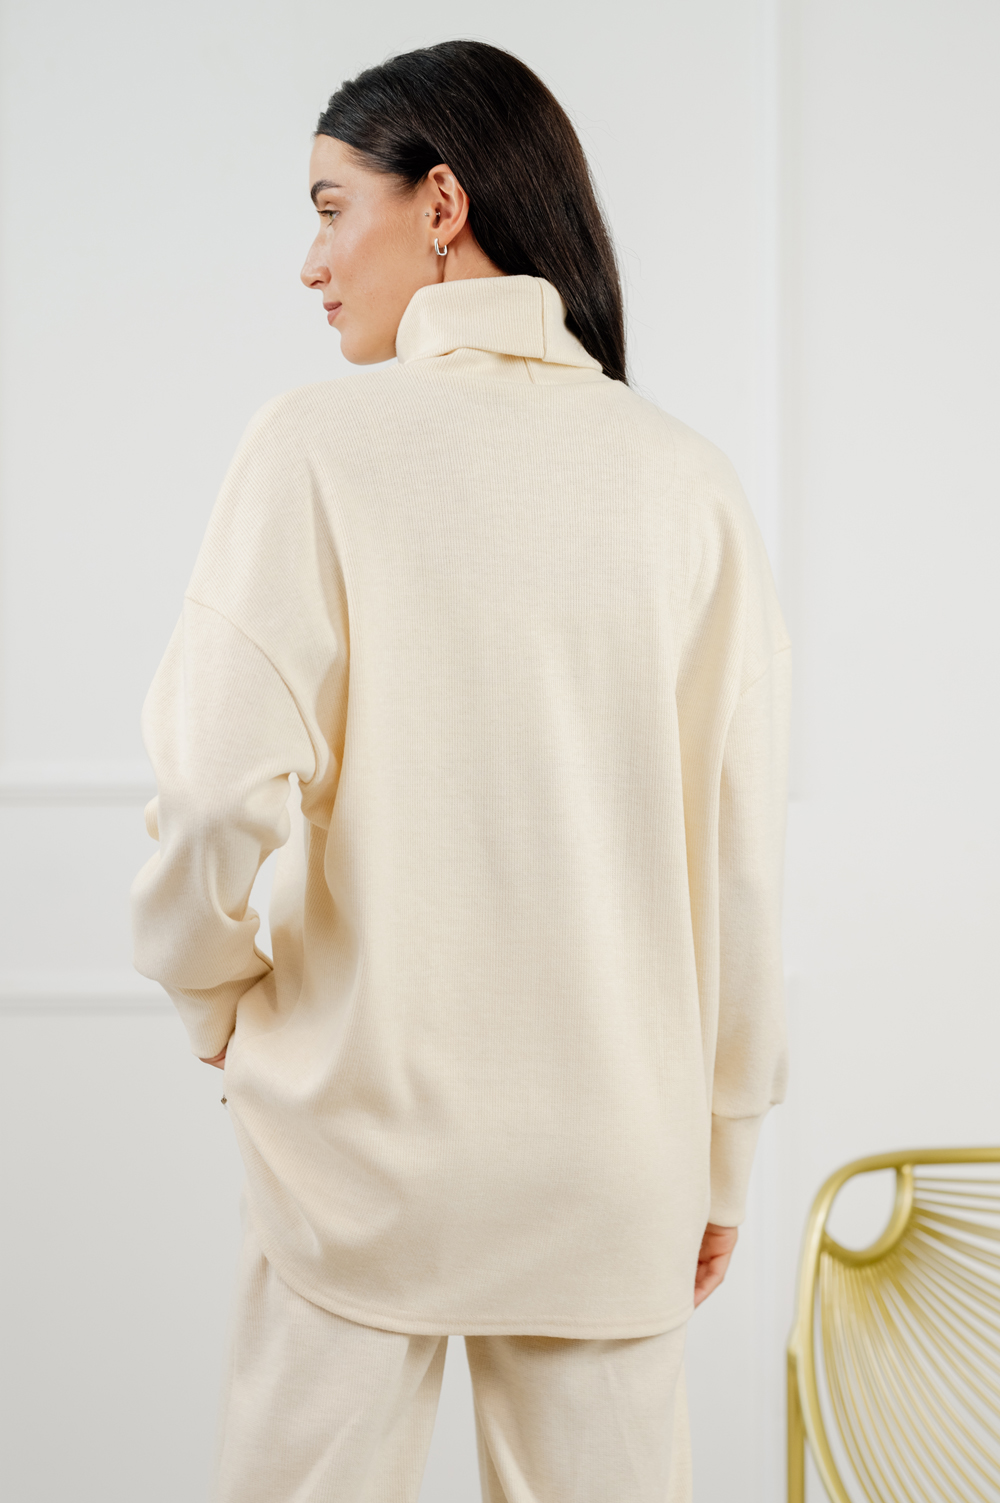 Cream angora suit with added wool.